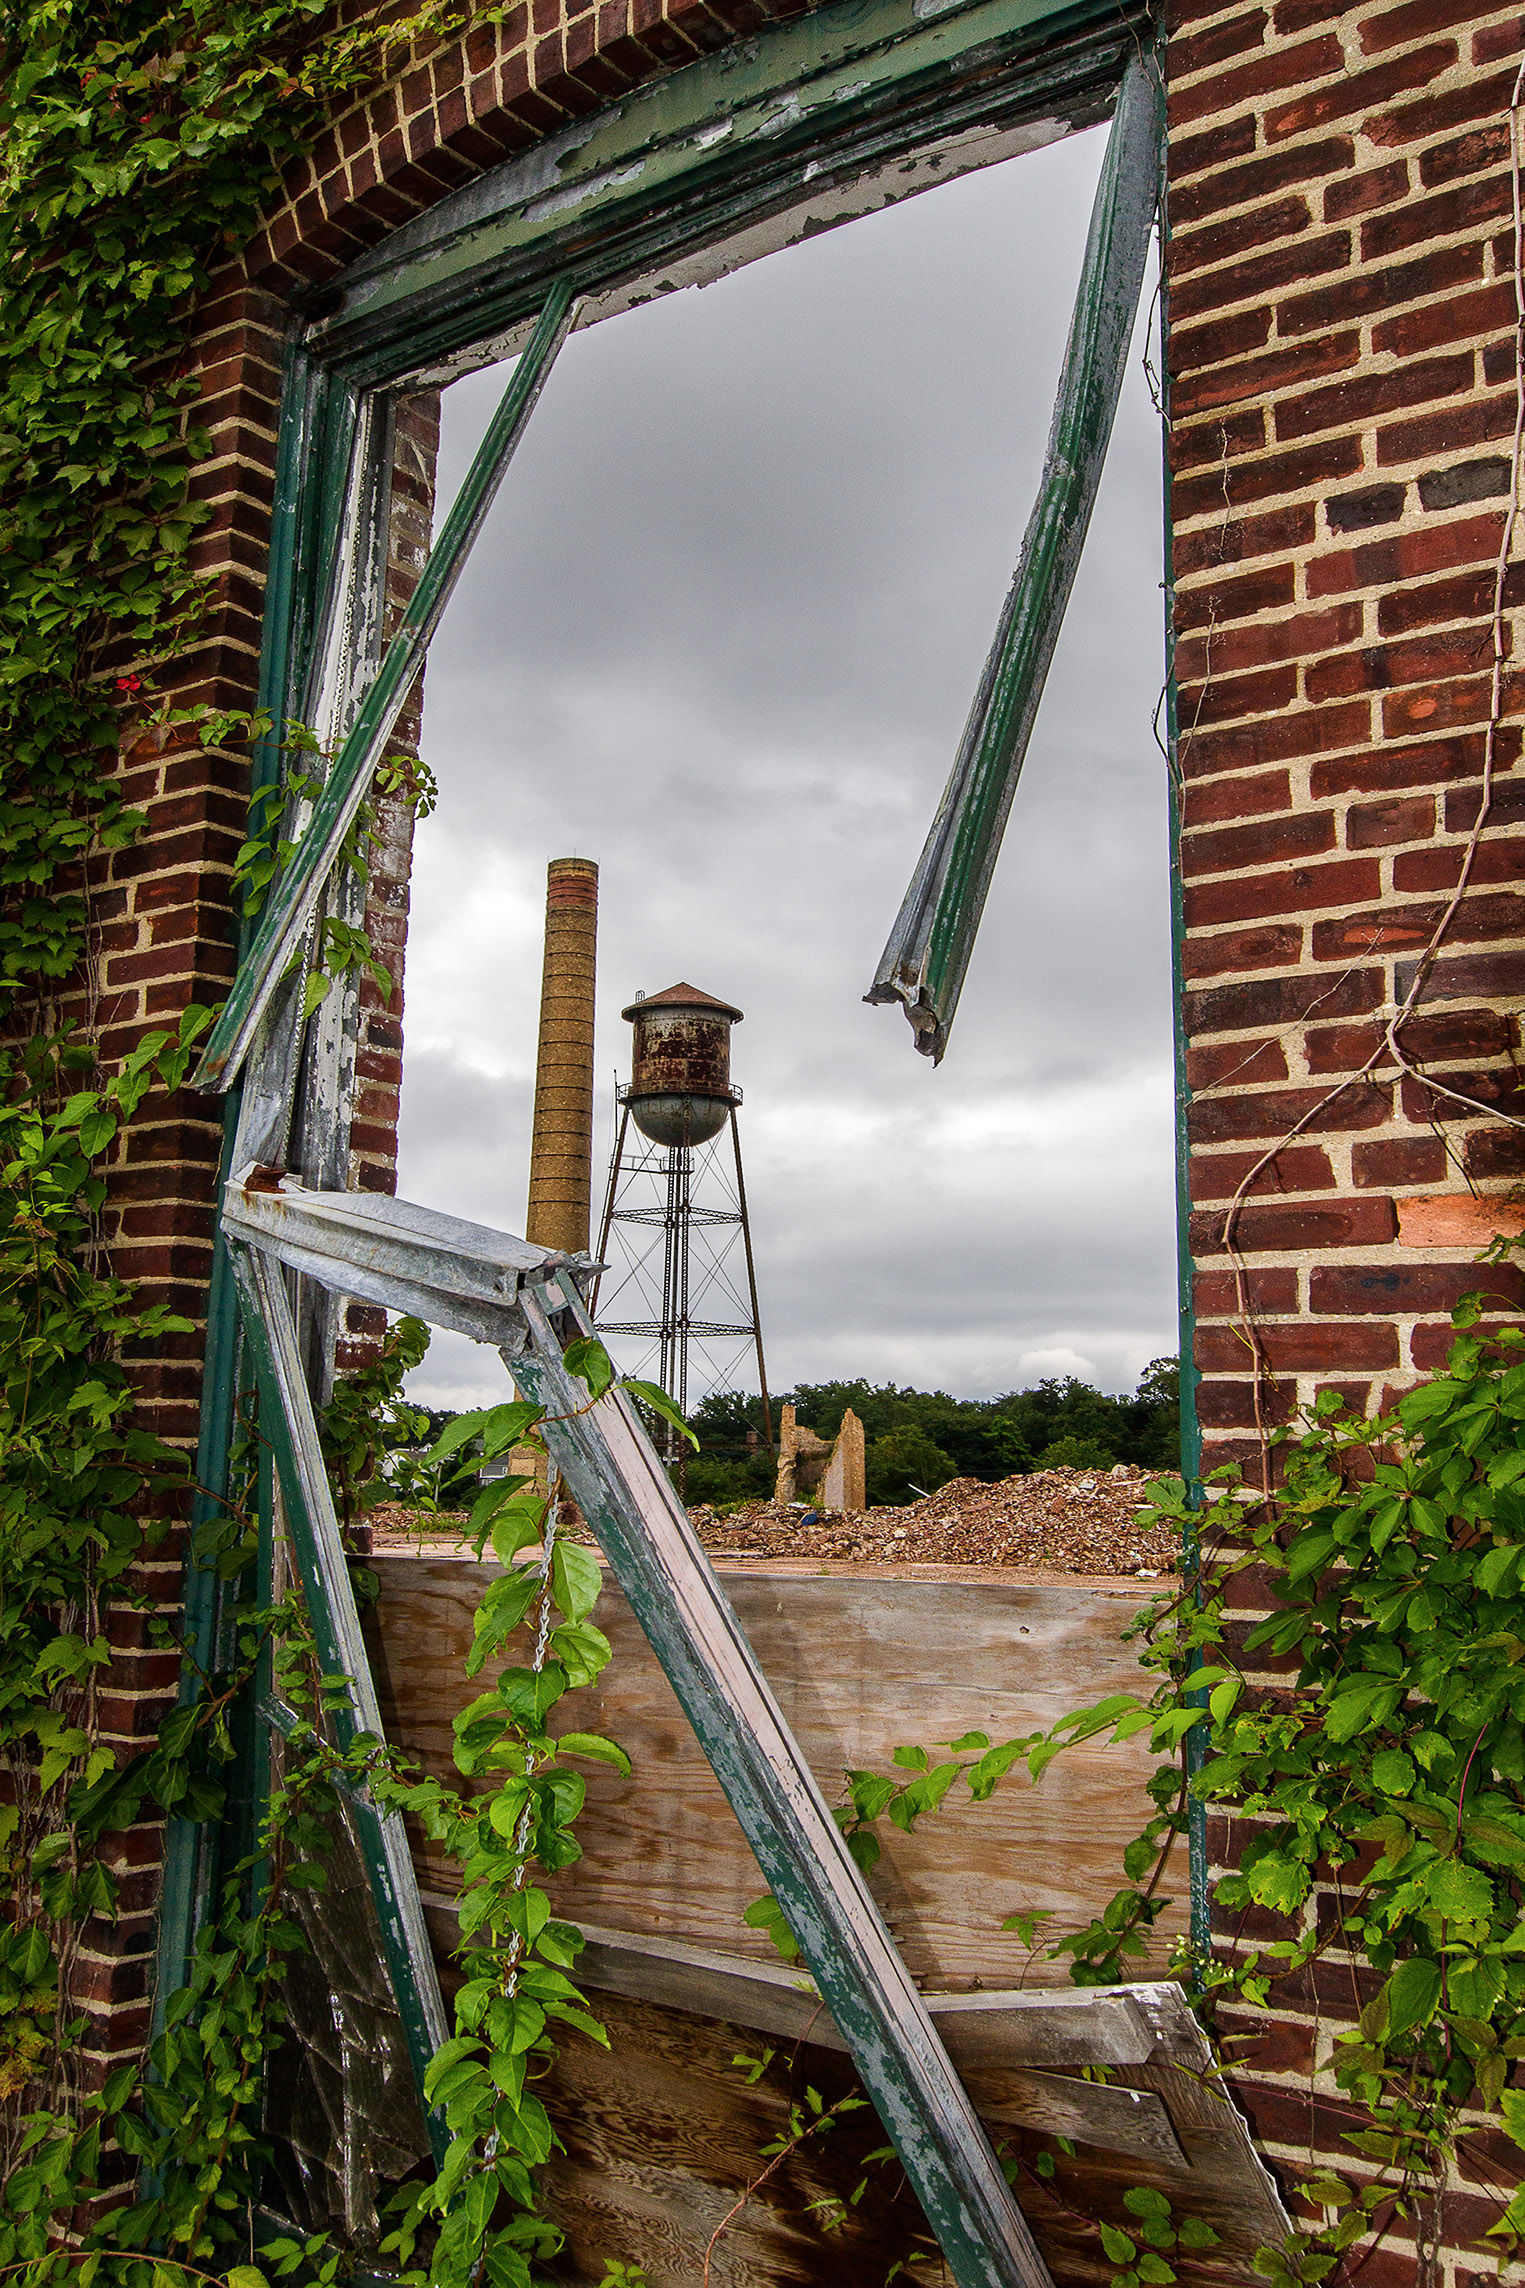 A view of the past Michelin Tire Factory in Milltown  NJ jpg